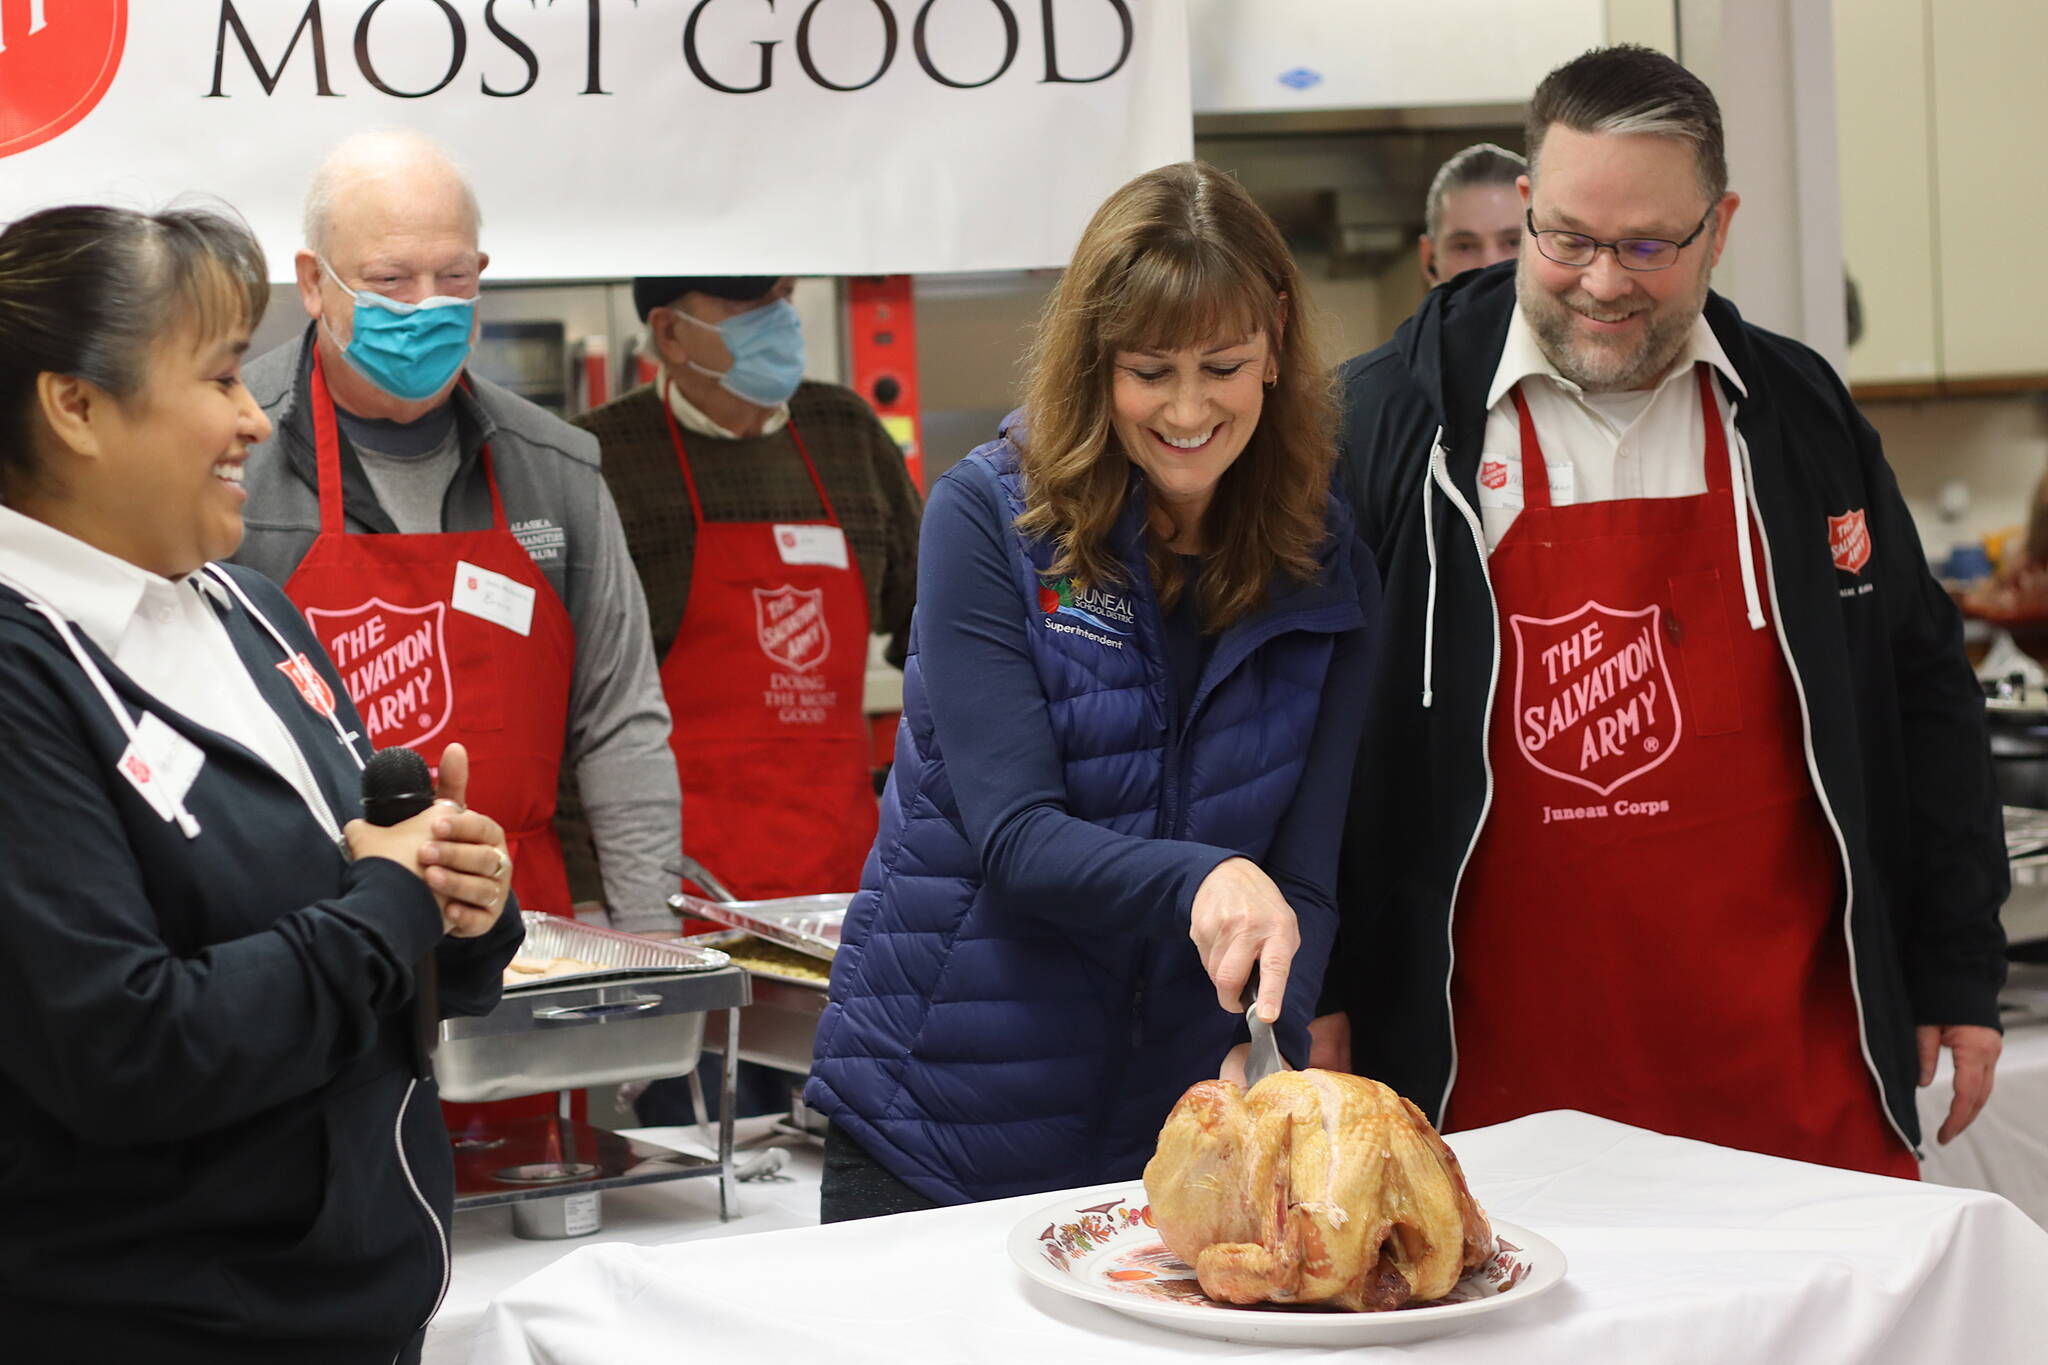 Juneau School District Superintendent Bridget Weiss performs the ceremonial first carving of a turkey at The Salvation Army’s annual Thanksgiving Day meal at the Juneau Yacht Club. Weiss, who is retiring next year after a 40-year career in education, said she is thankful her family is in good health and for the people she’s interacted with during her time at local schools. (Mark Sabbatini)